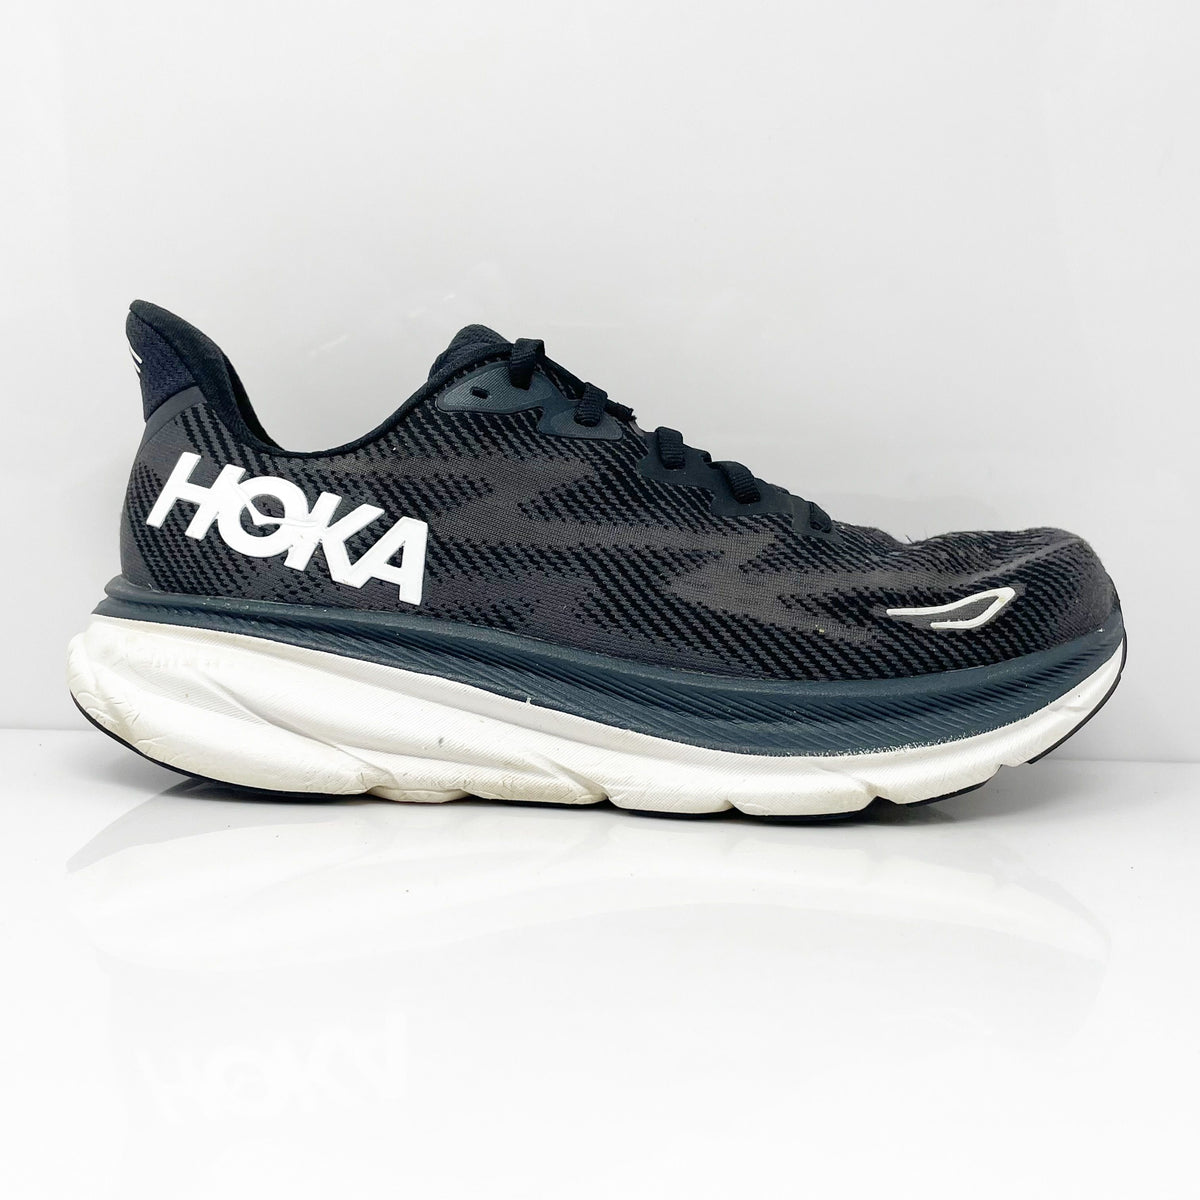 Hoka One One Mens Clifton 9 1127895 BWHT Black Running Shoes Sneakers ...